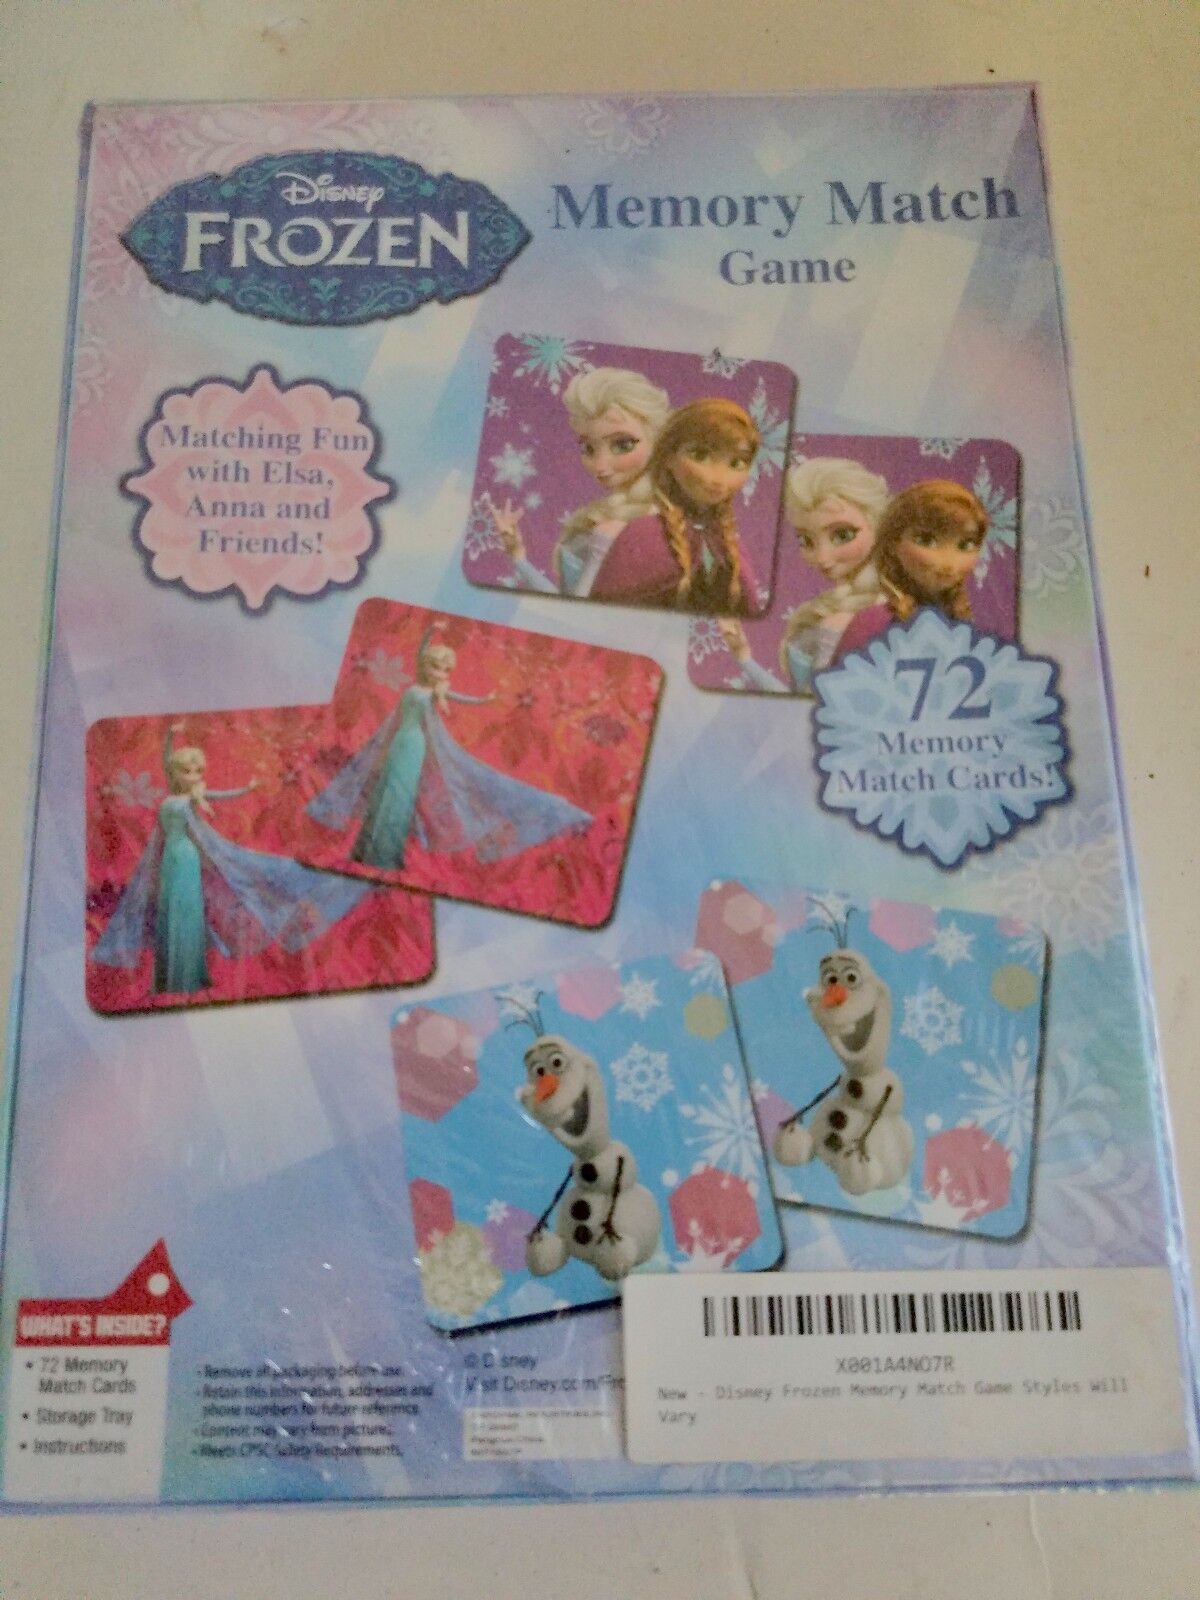 Disney Frozen Memory Match Game 2-4 players, age 3 plus 72 cards new